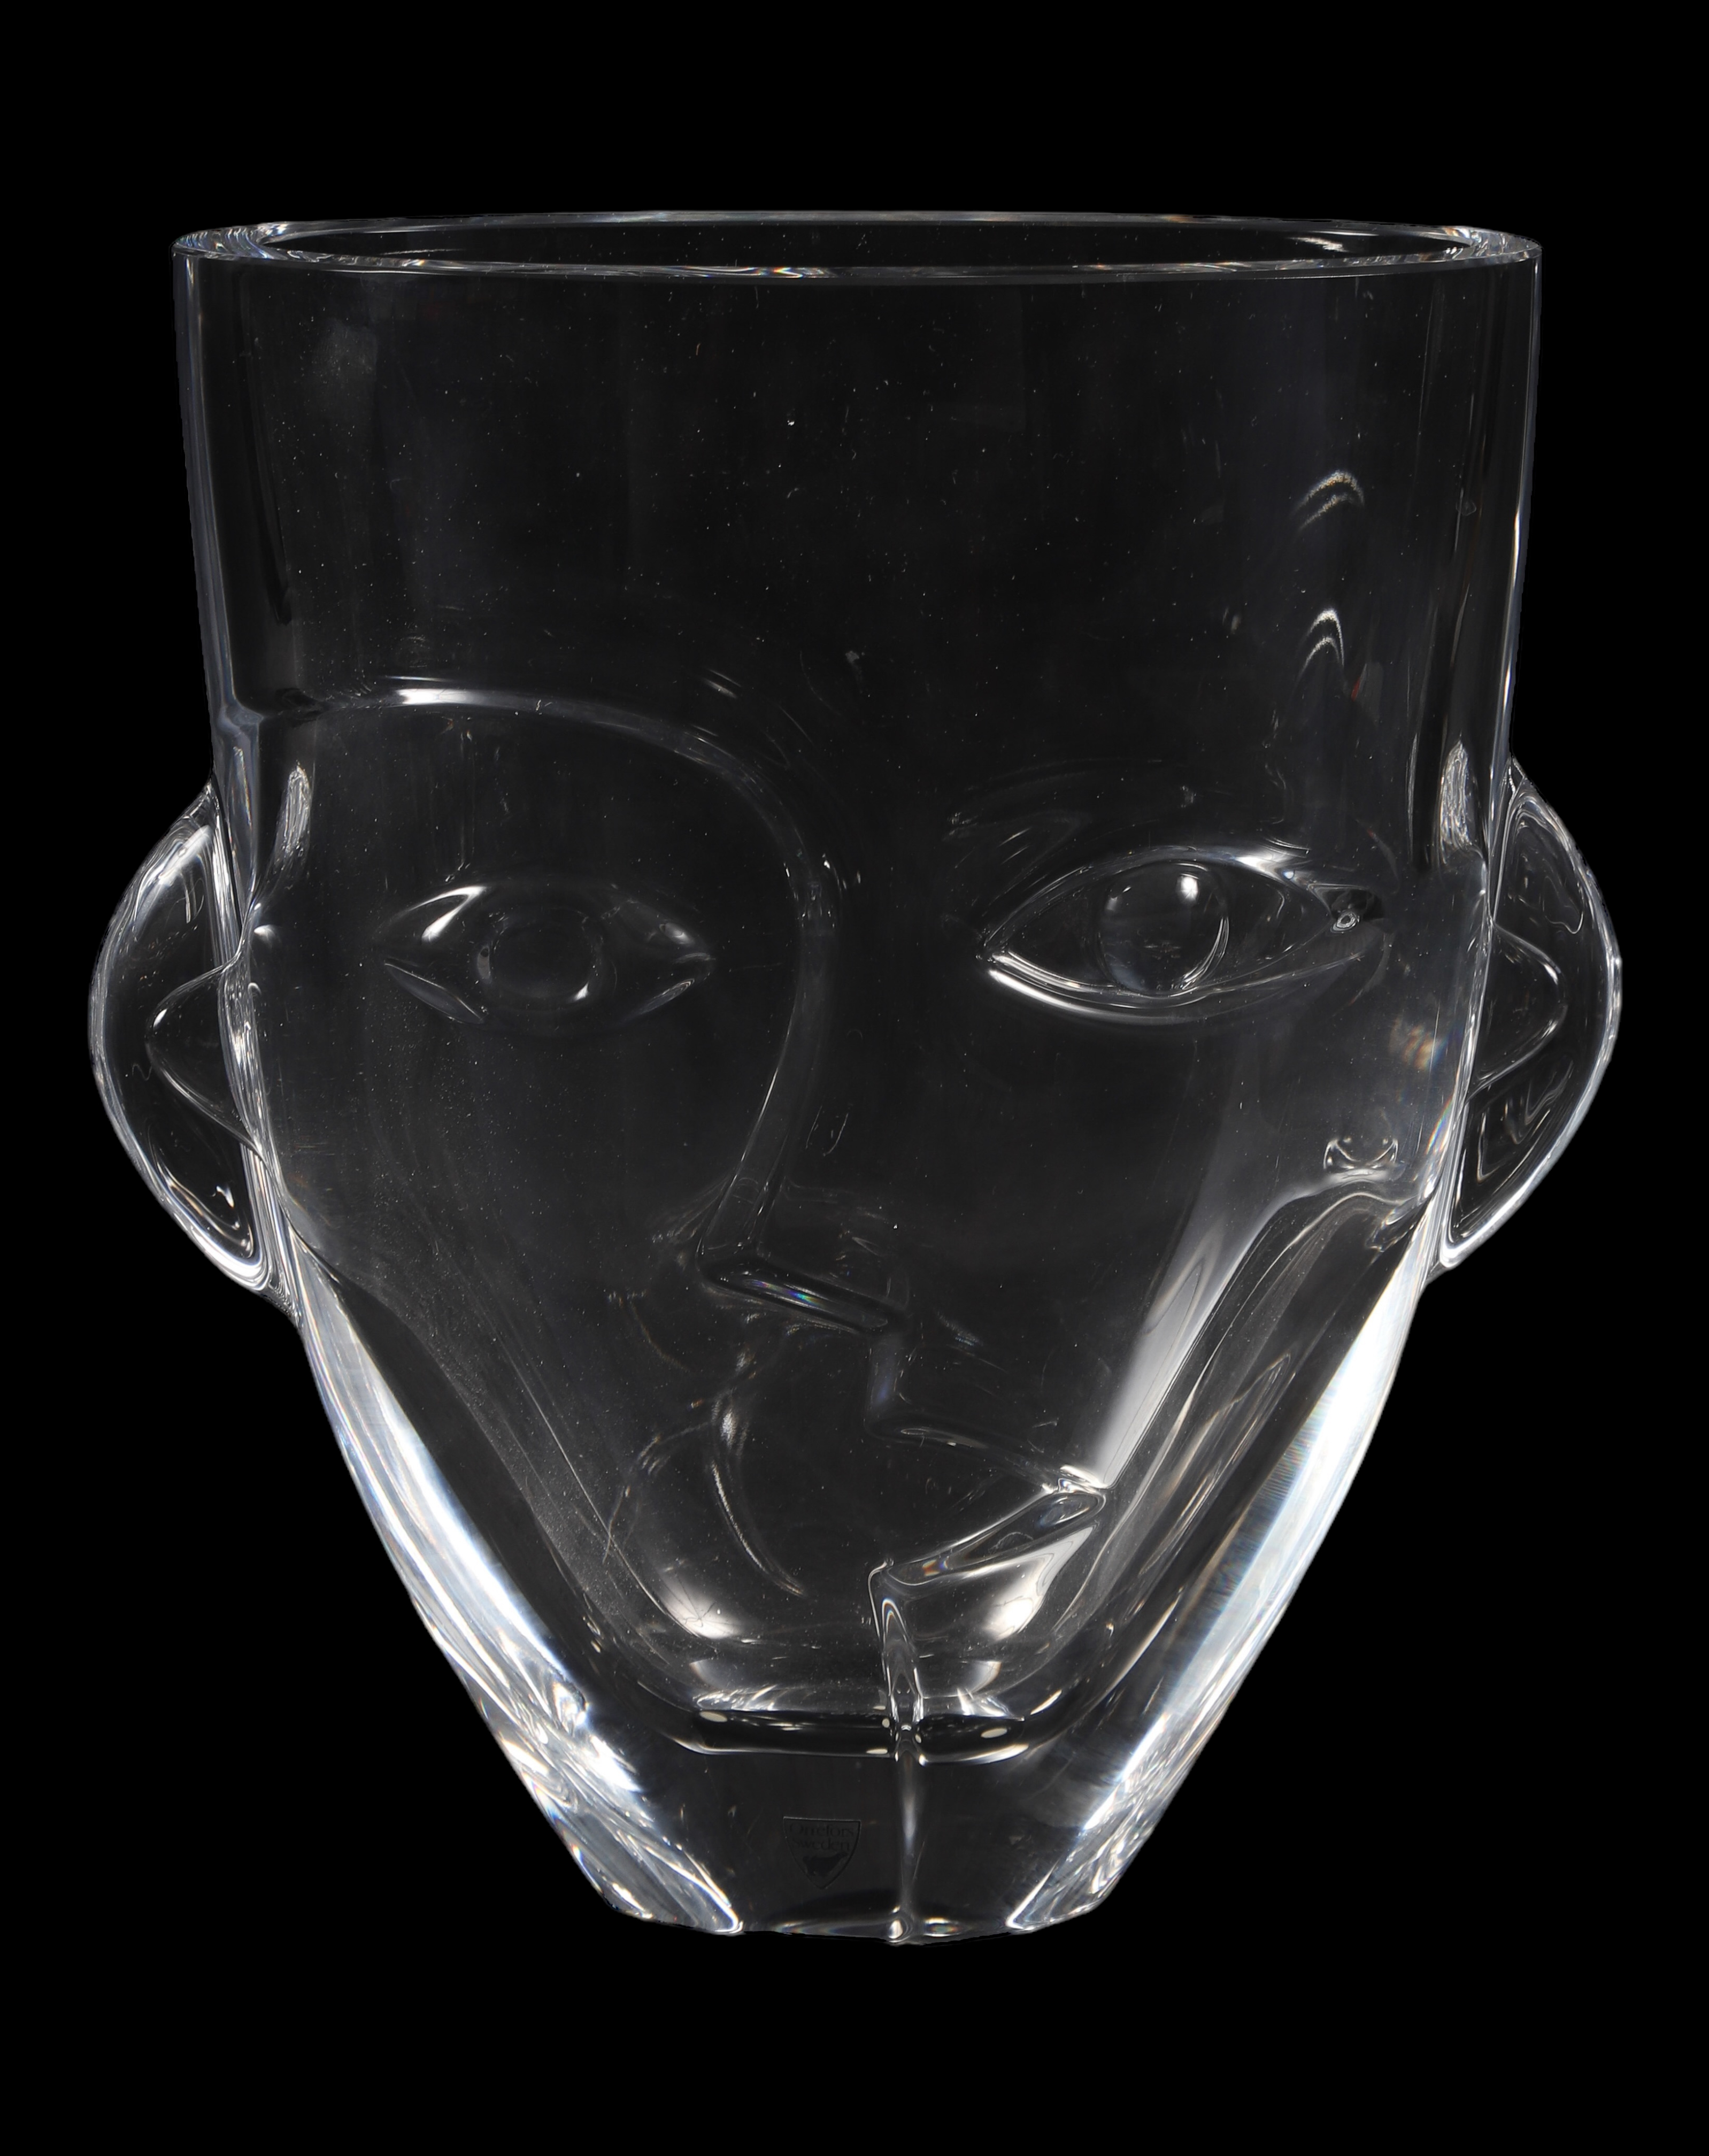 Orrefors clear glass sculptural